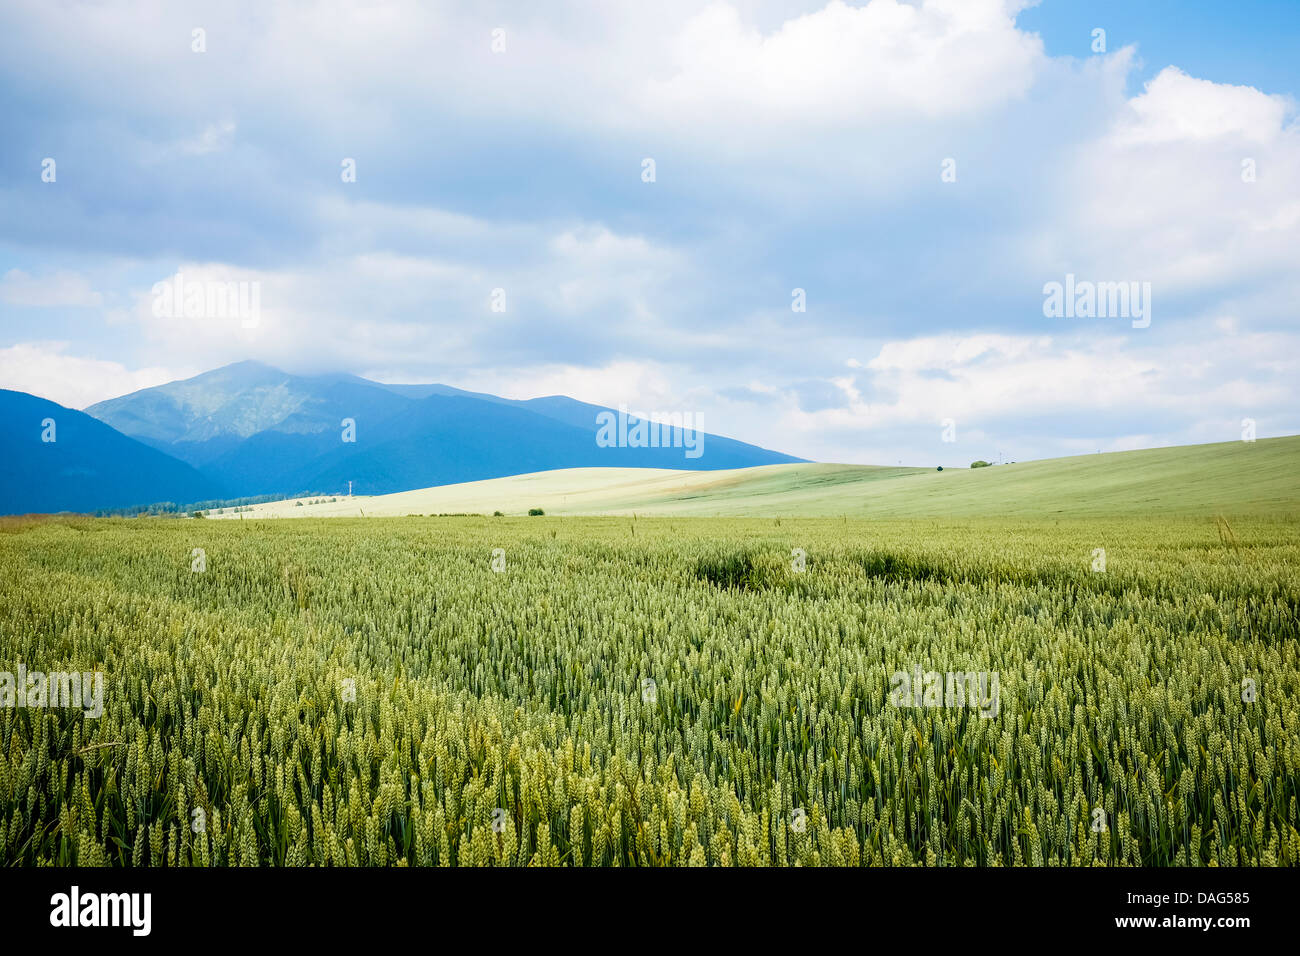 siummer July fileds with green crop Stock Photo